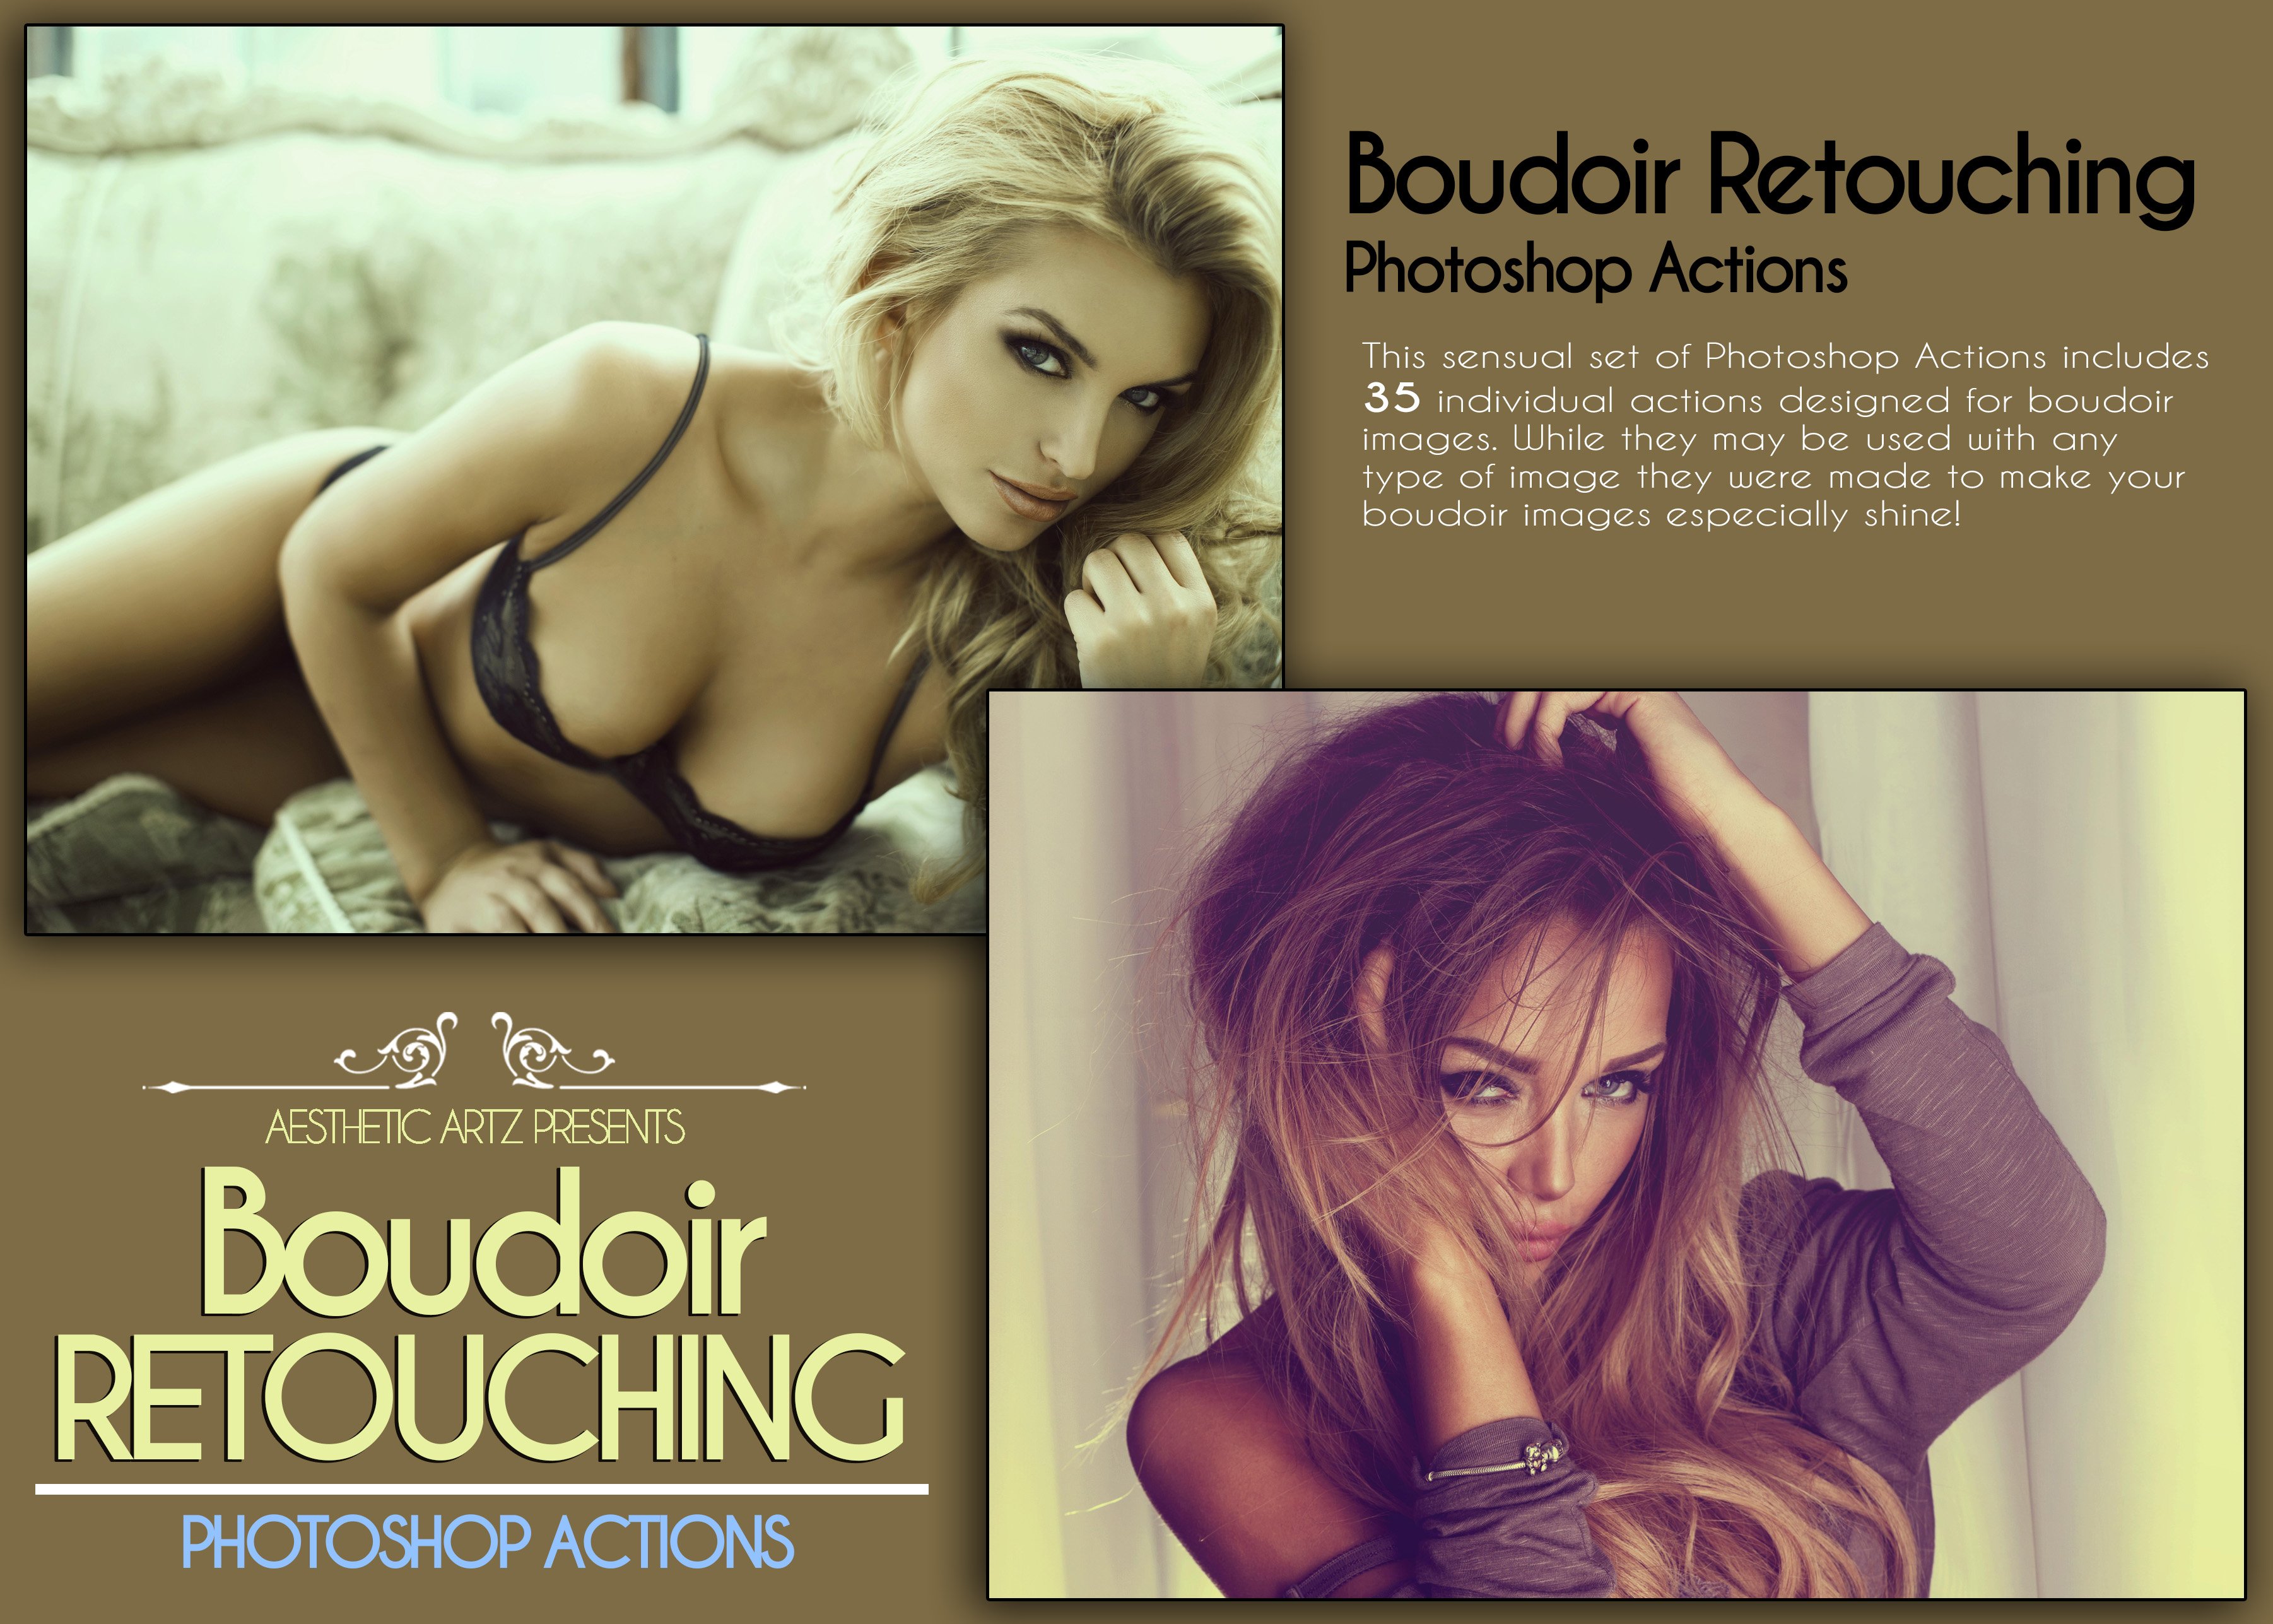 Boudoir Retouching Photoshop Actionspreview image.